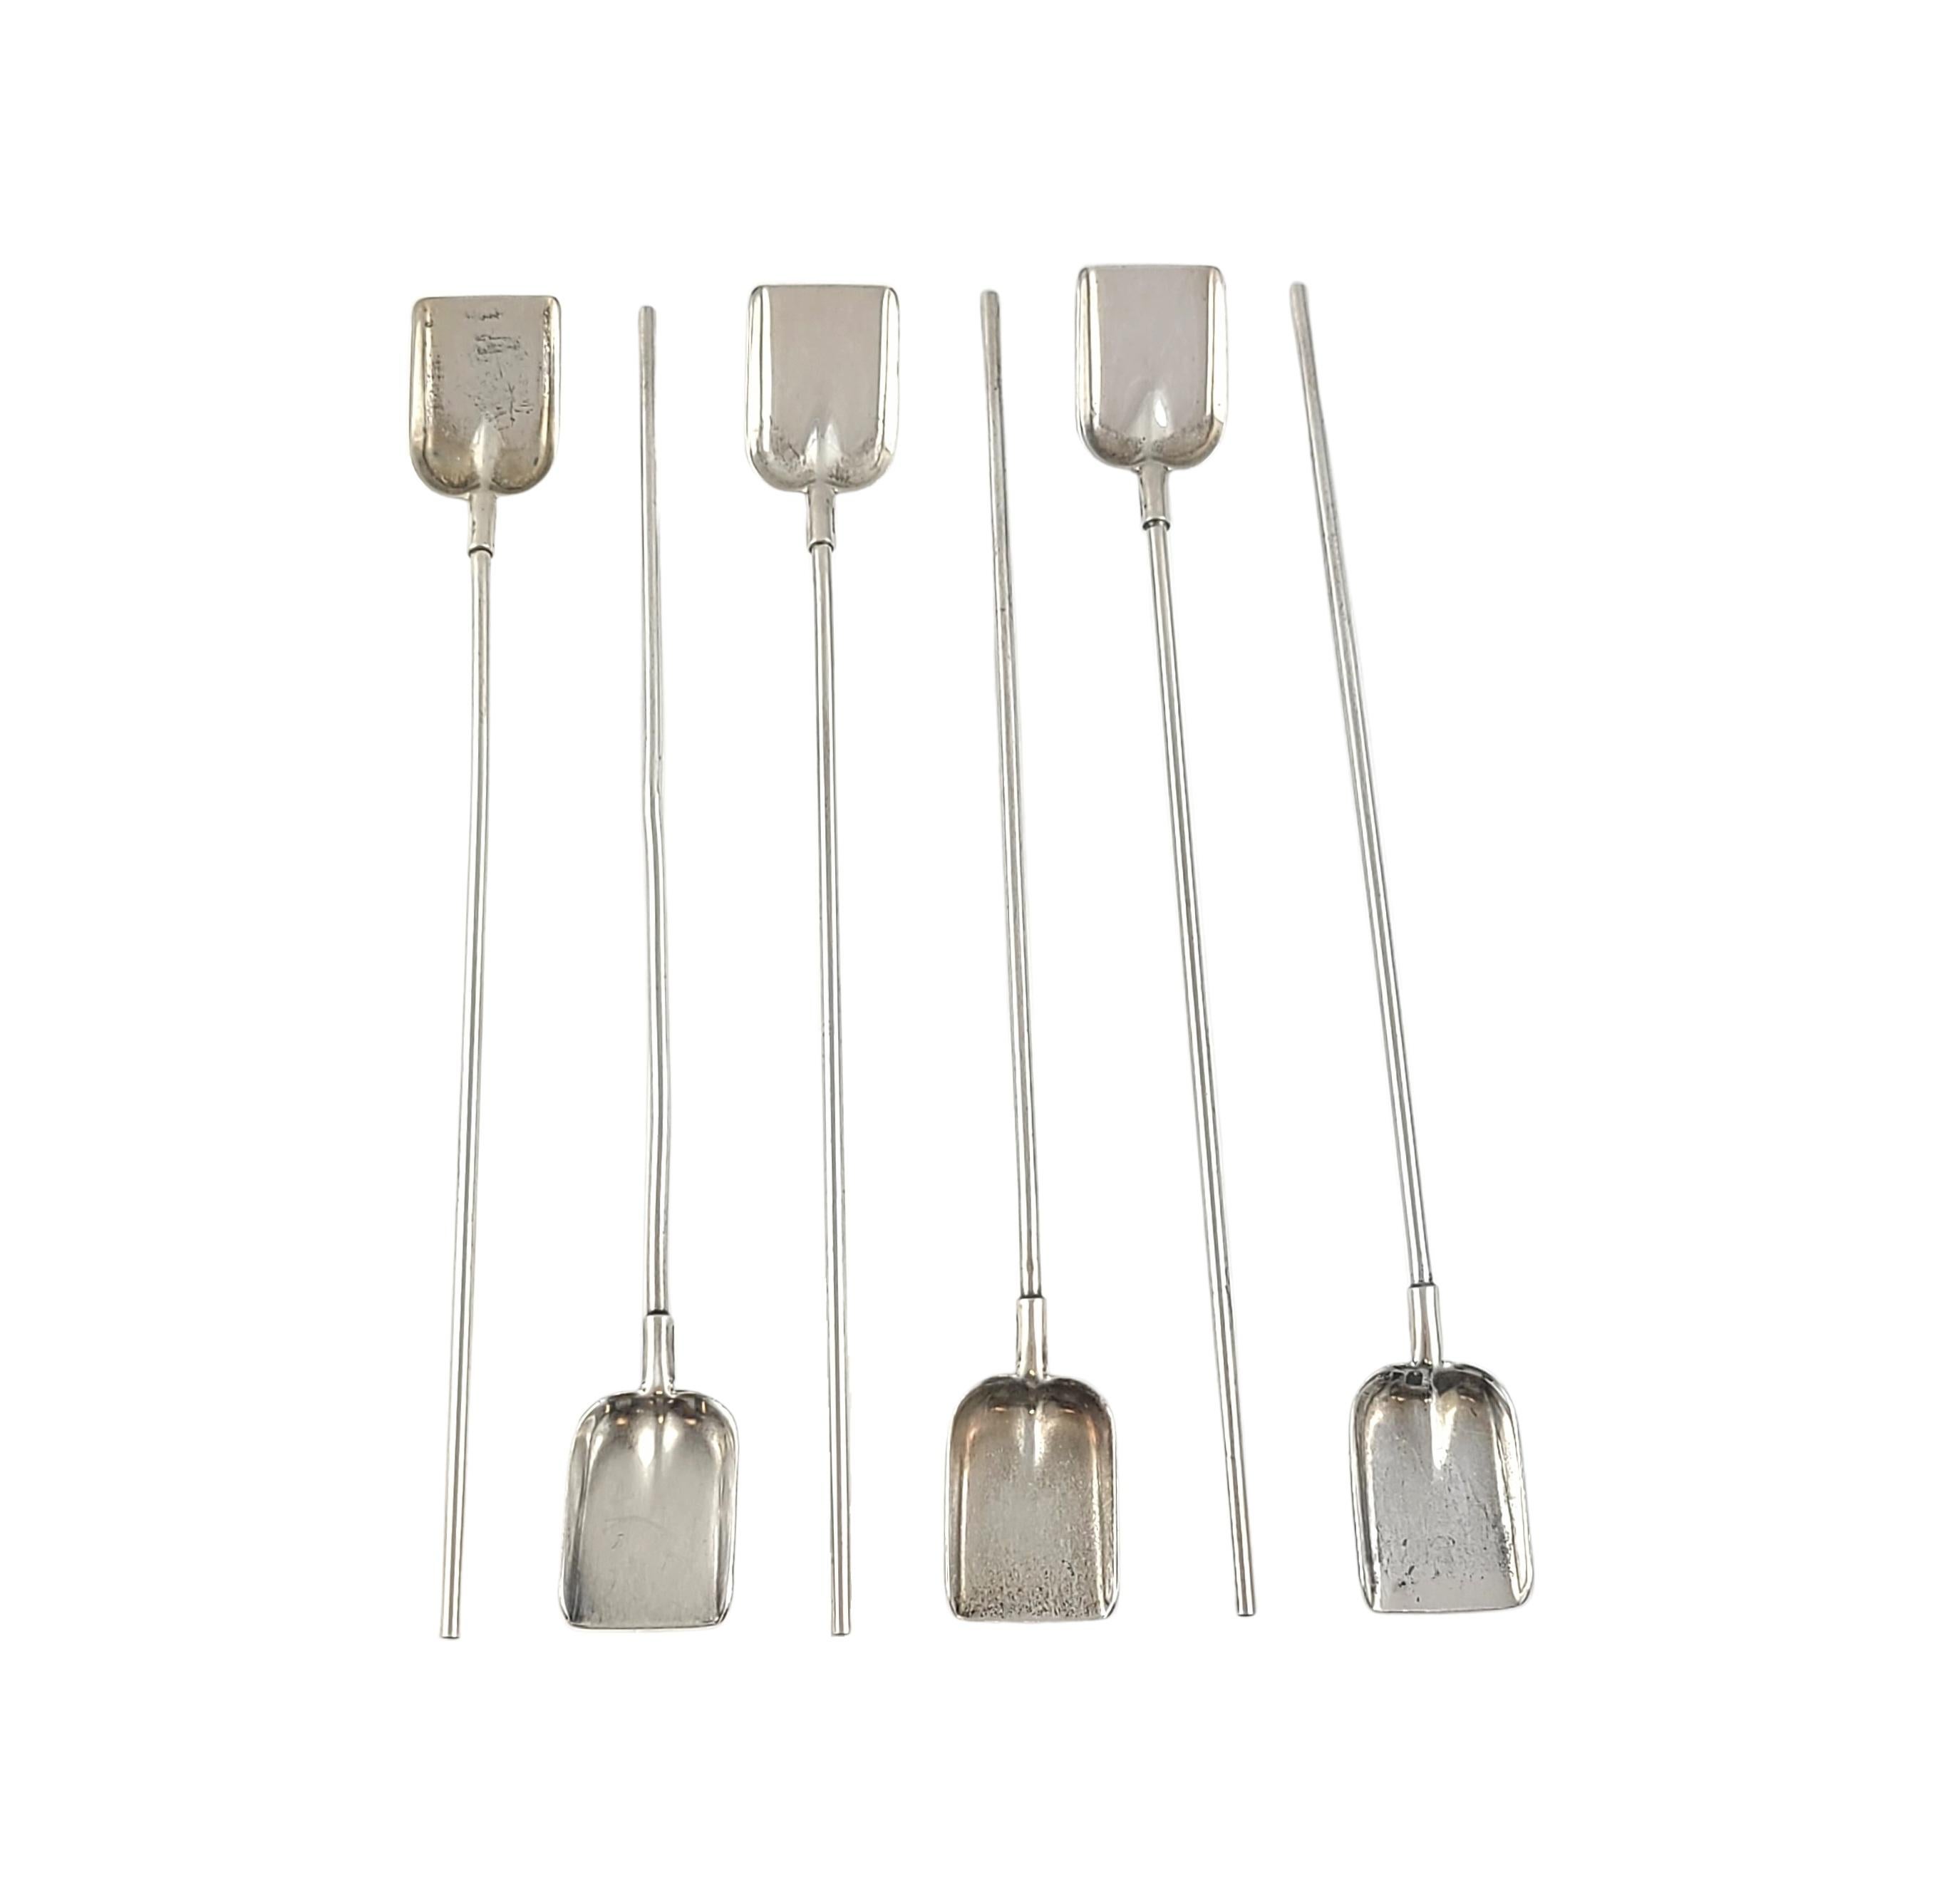 Set of 6 sterling silver shovel iced tea or mint julep spoon straws by Tiffany & Co.

No monogram

Vintage spoons with a shovel bowl. The long handle is hollow and can be used as a straw. Includes one Tiffany & Co pouch that all 6 spoons fit